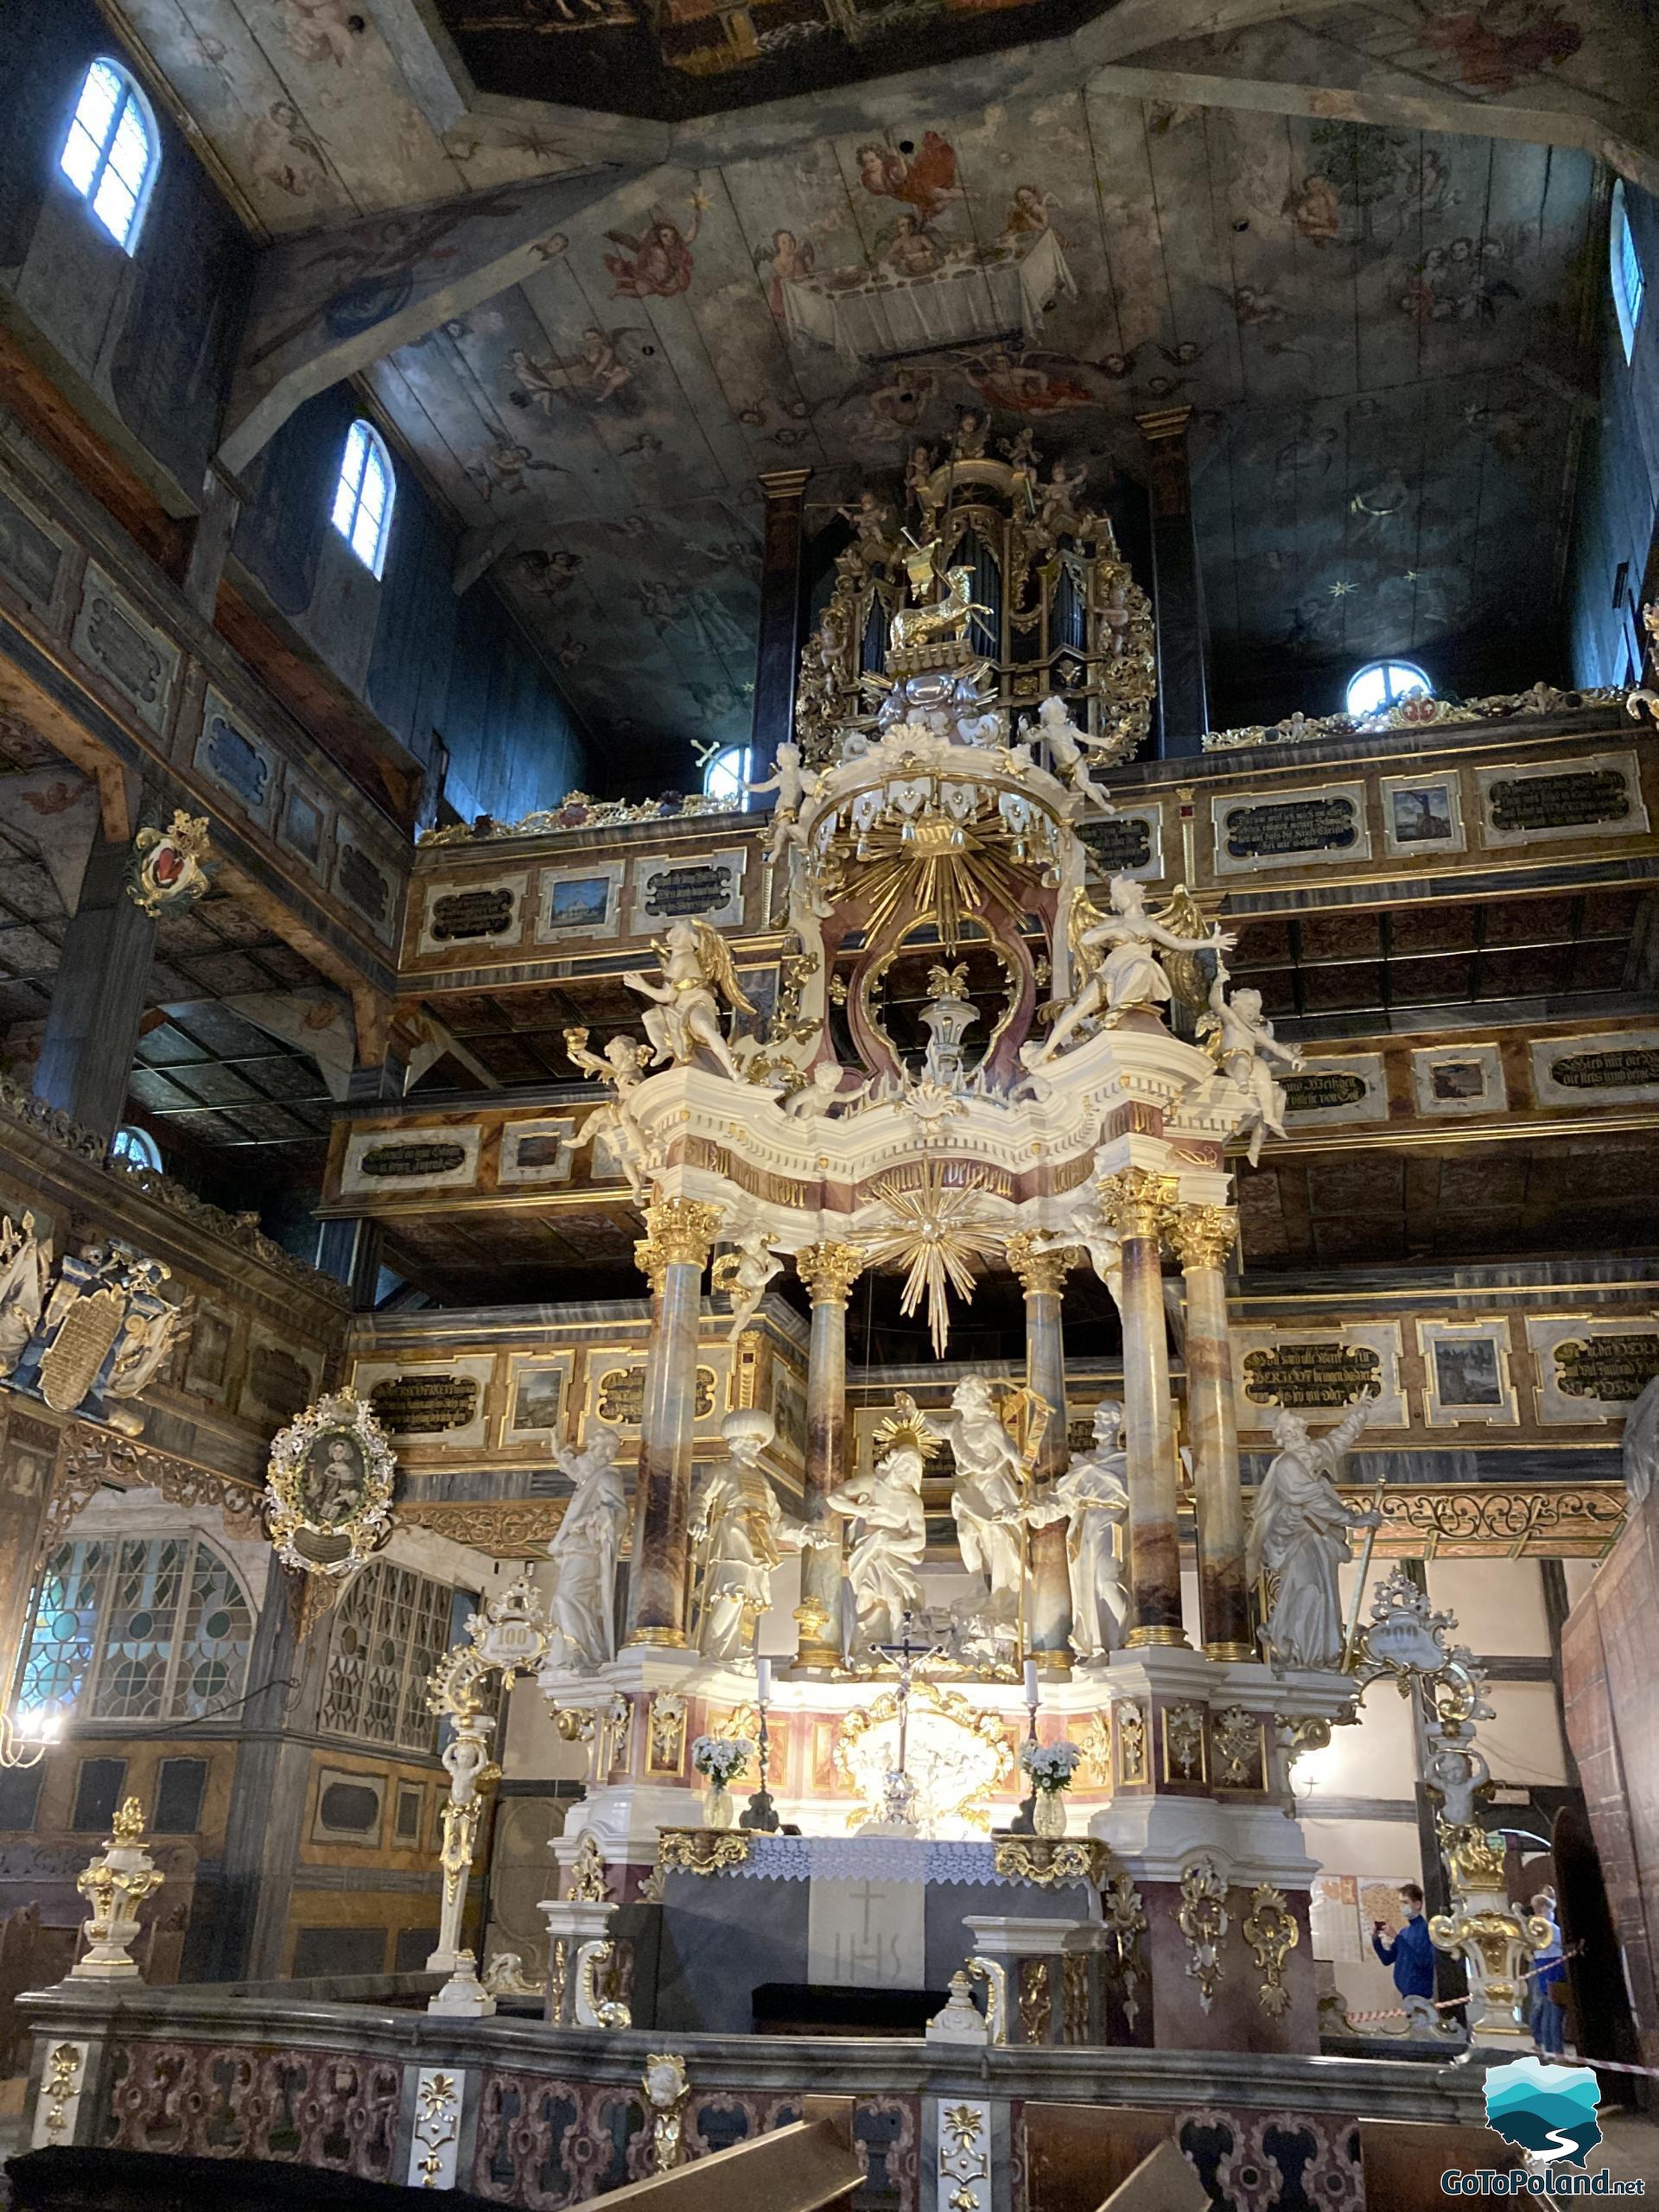 The main altar and wooden ceiling painted with saints